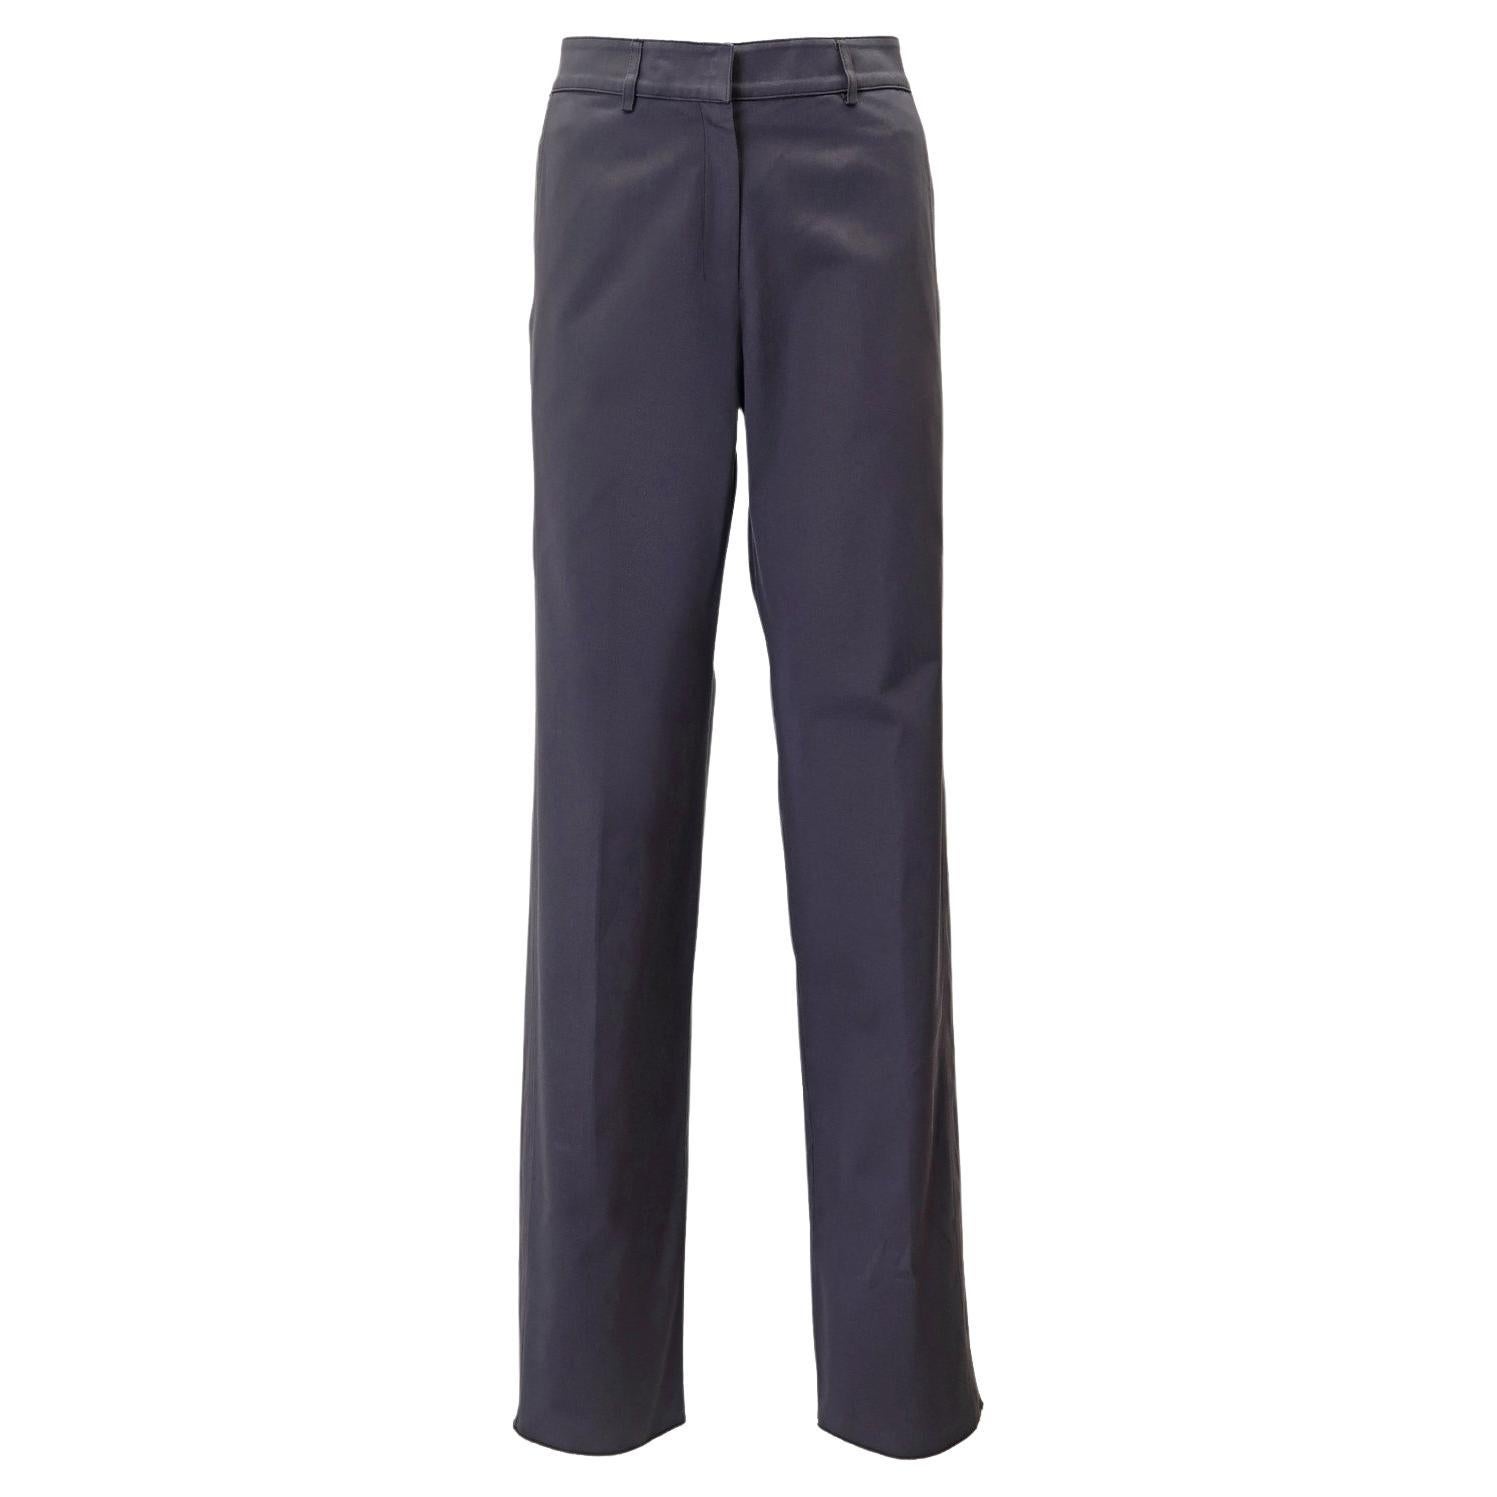 Yves Saint Laurent by Tom Ford FW-2001 Higher Waist Cotton Pants